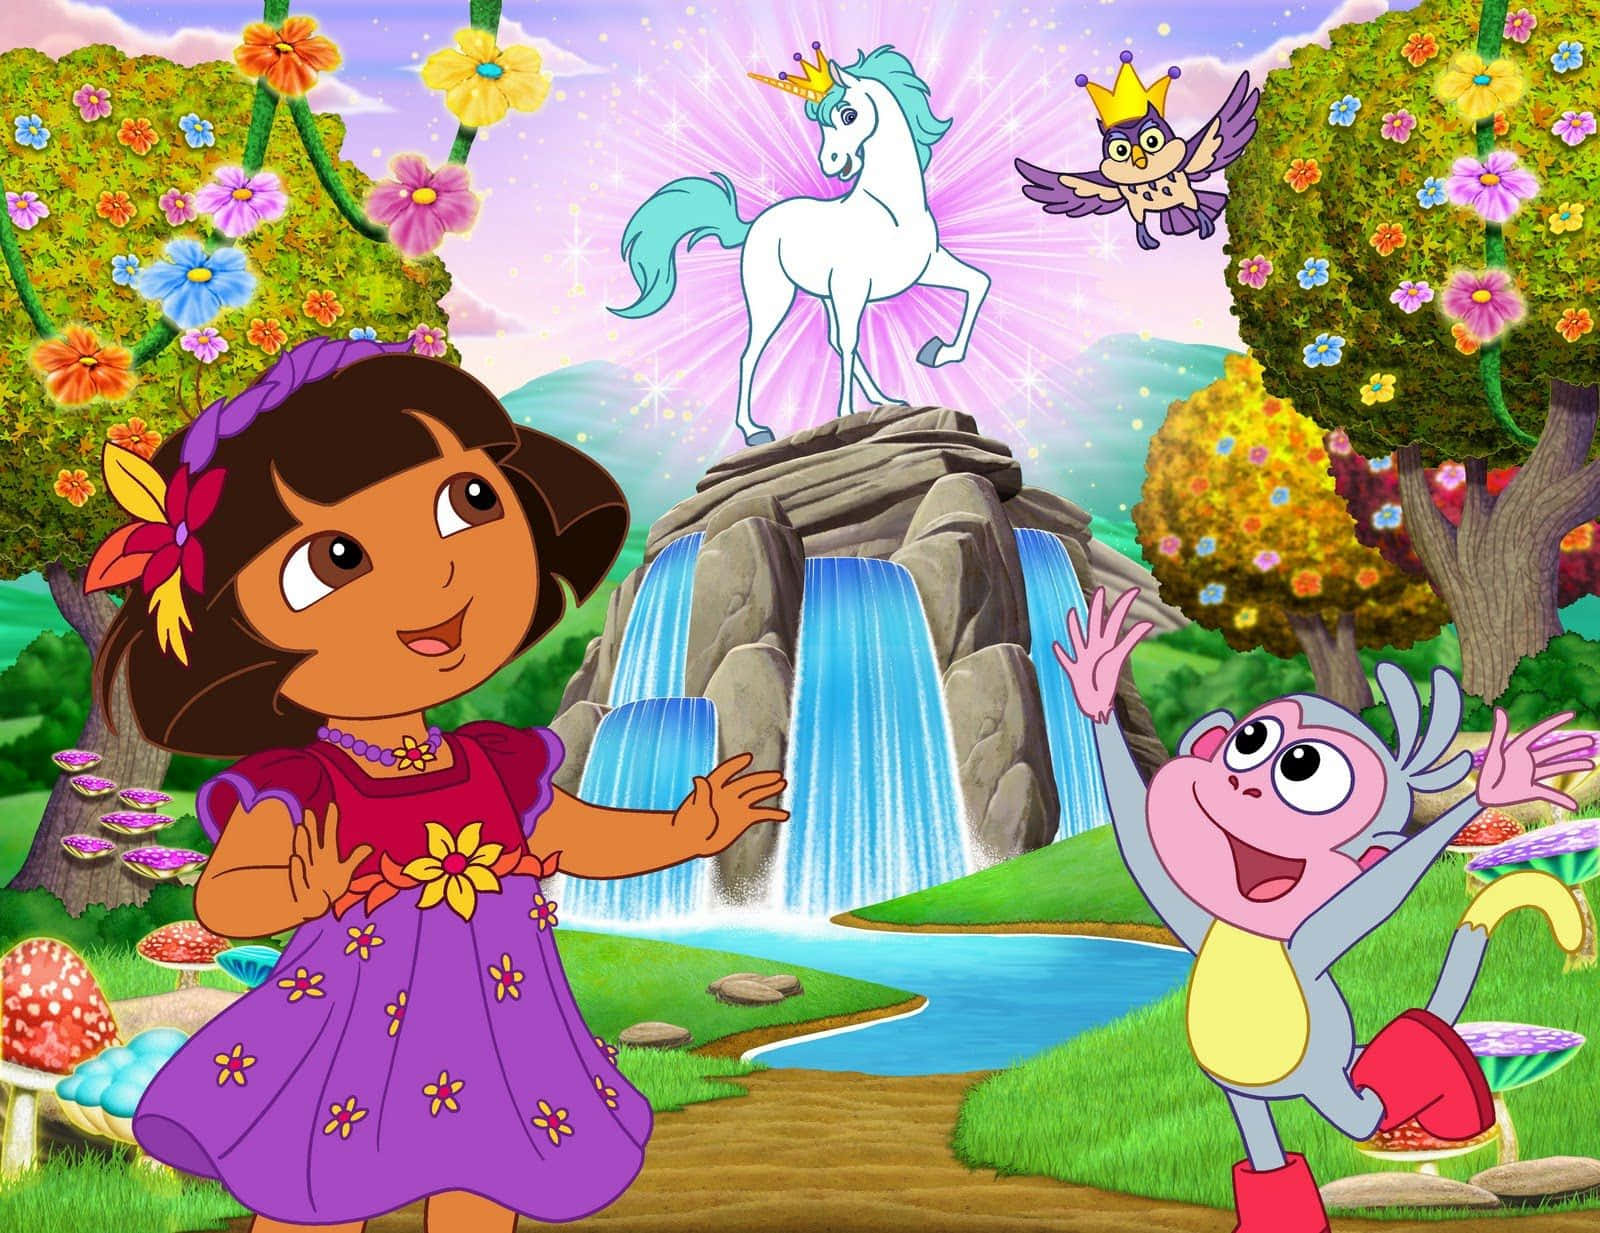 Join Dora and her friends on their exciting adventure!